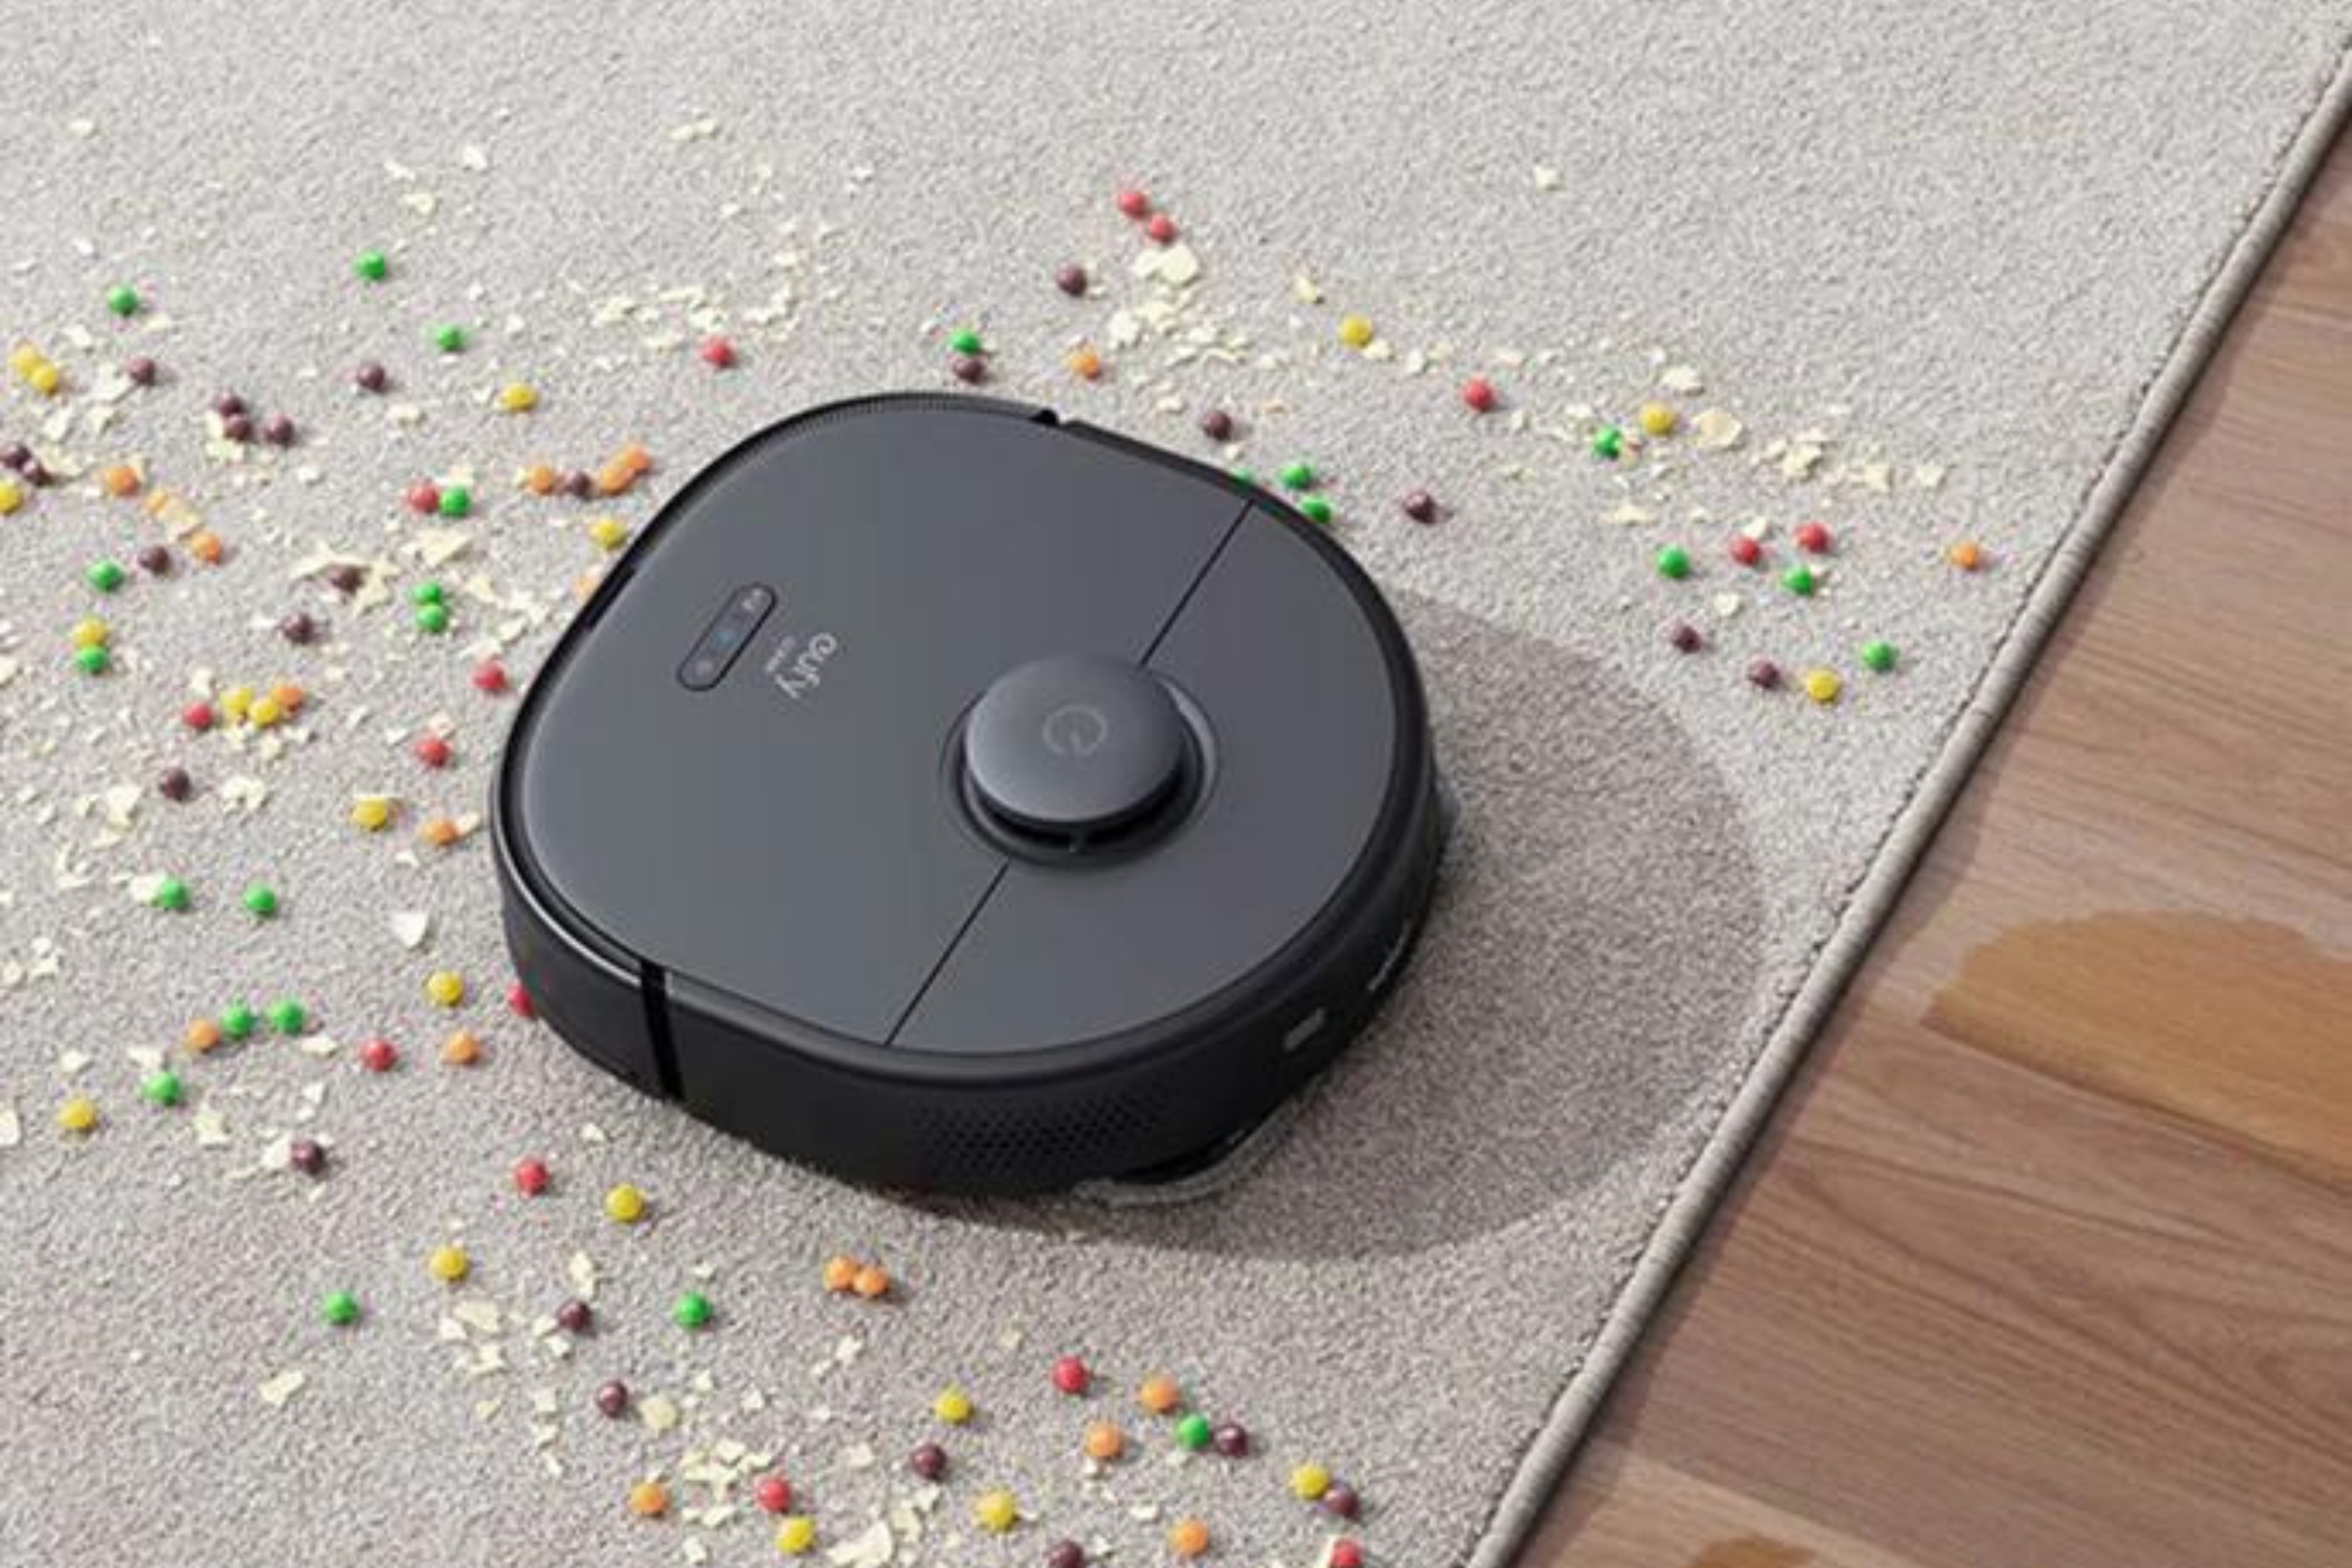 eufy X9 Pro Robot Vacuum and Mop with Auto-Clean Station on carpet eating candy